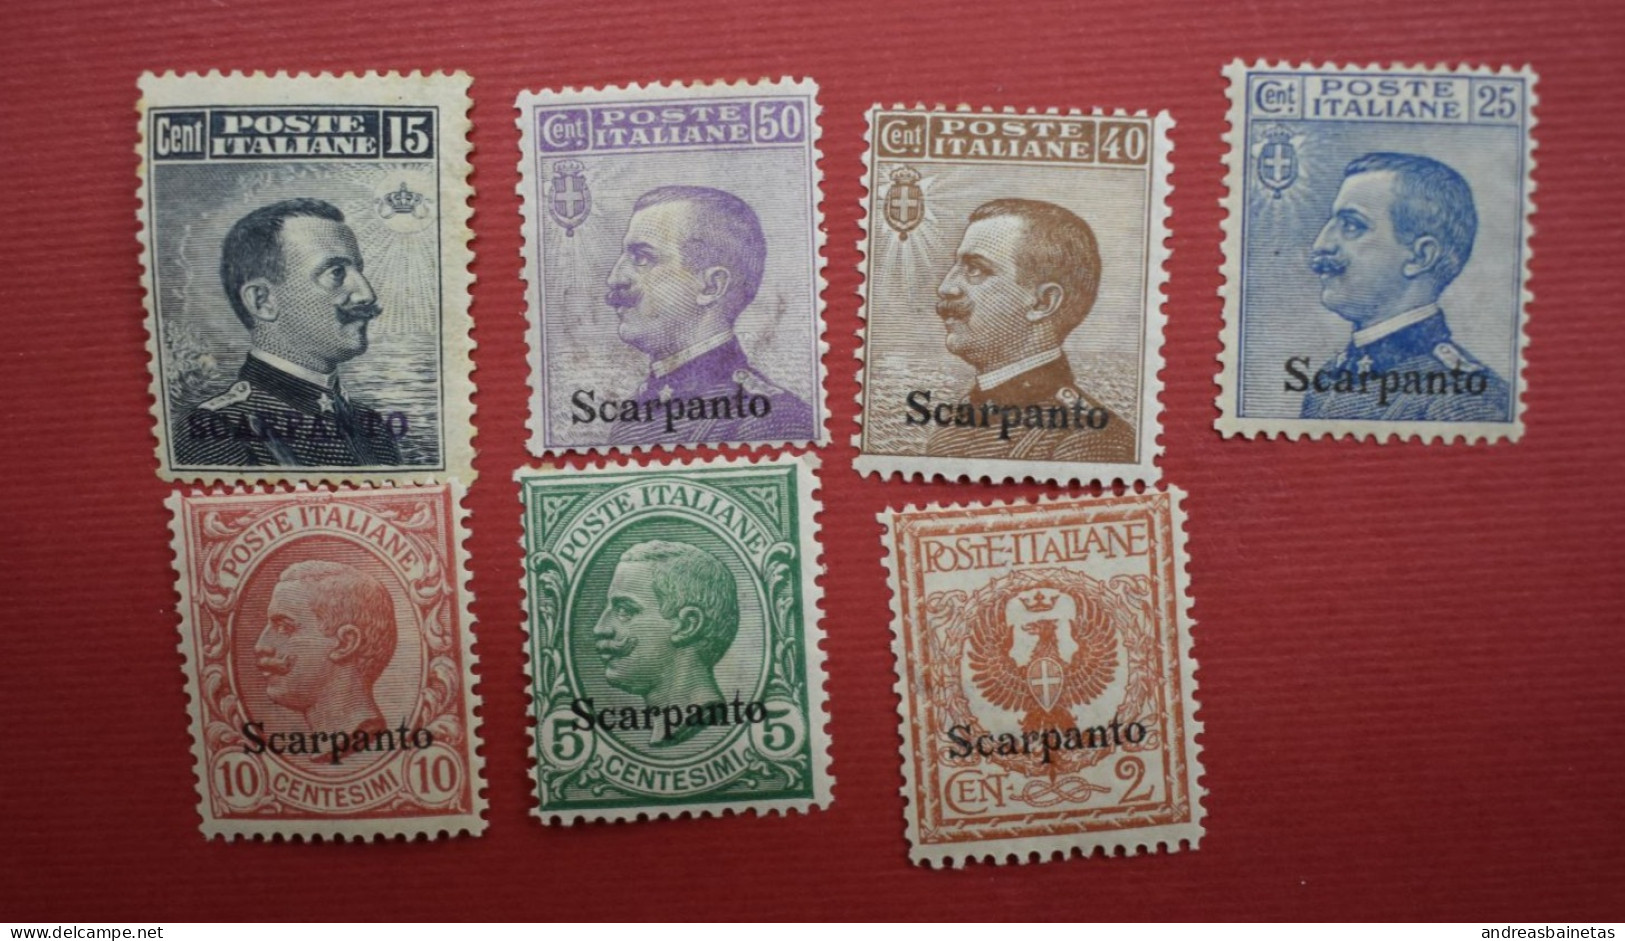 Stamps Greece ITALIAN OCCUPATION - ITALIAN POST OFFICE 1912 "SCARPANTO" Ovpt, Complete Set Of 7 Values, M. (Hellas 3IV/9 - Dodekanesos